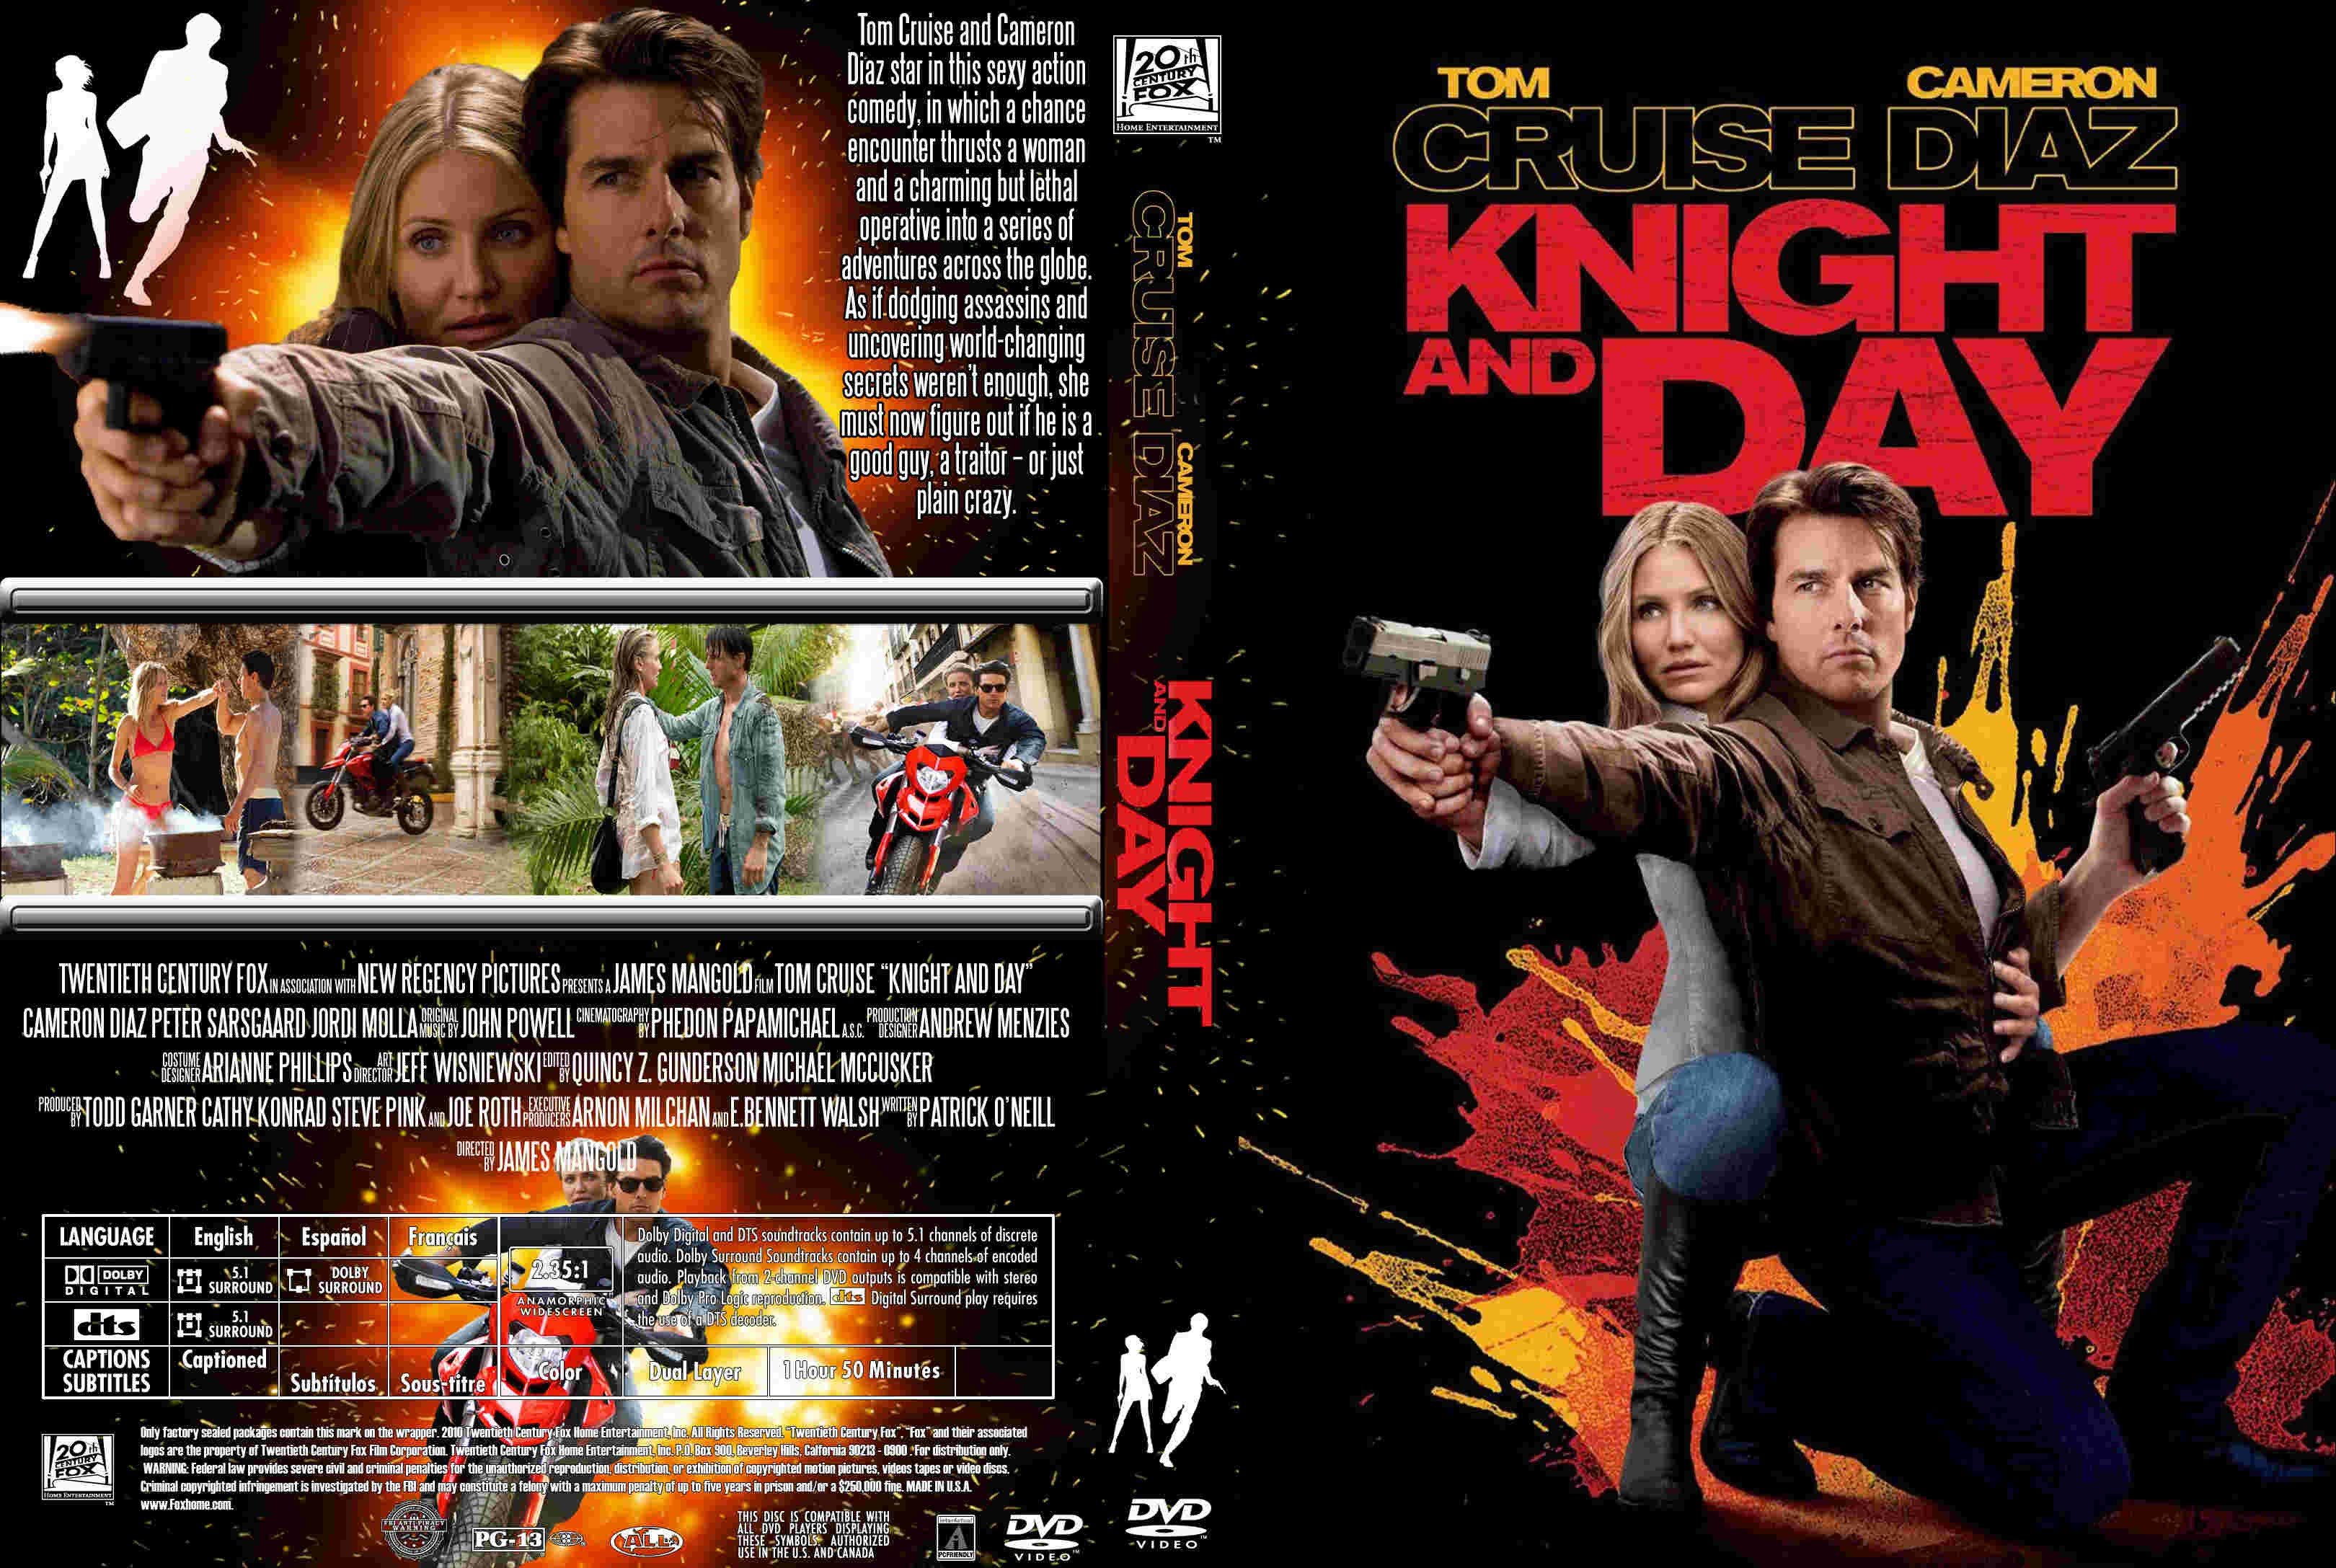 Jaquette DVD Knight and day custom